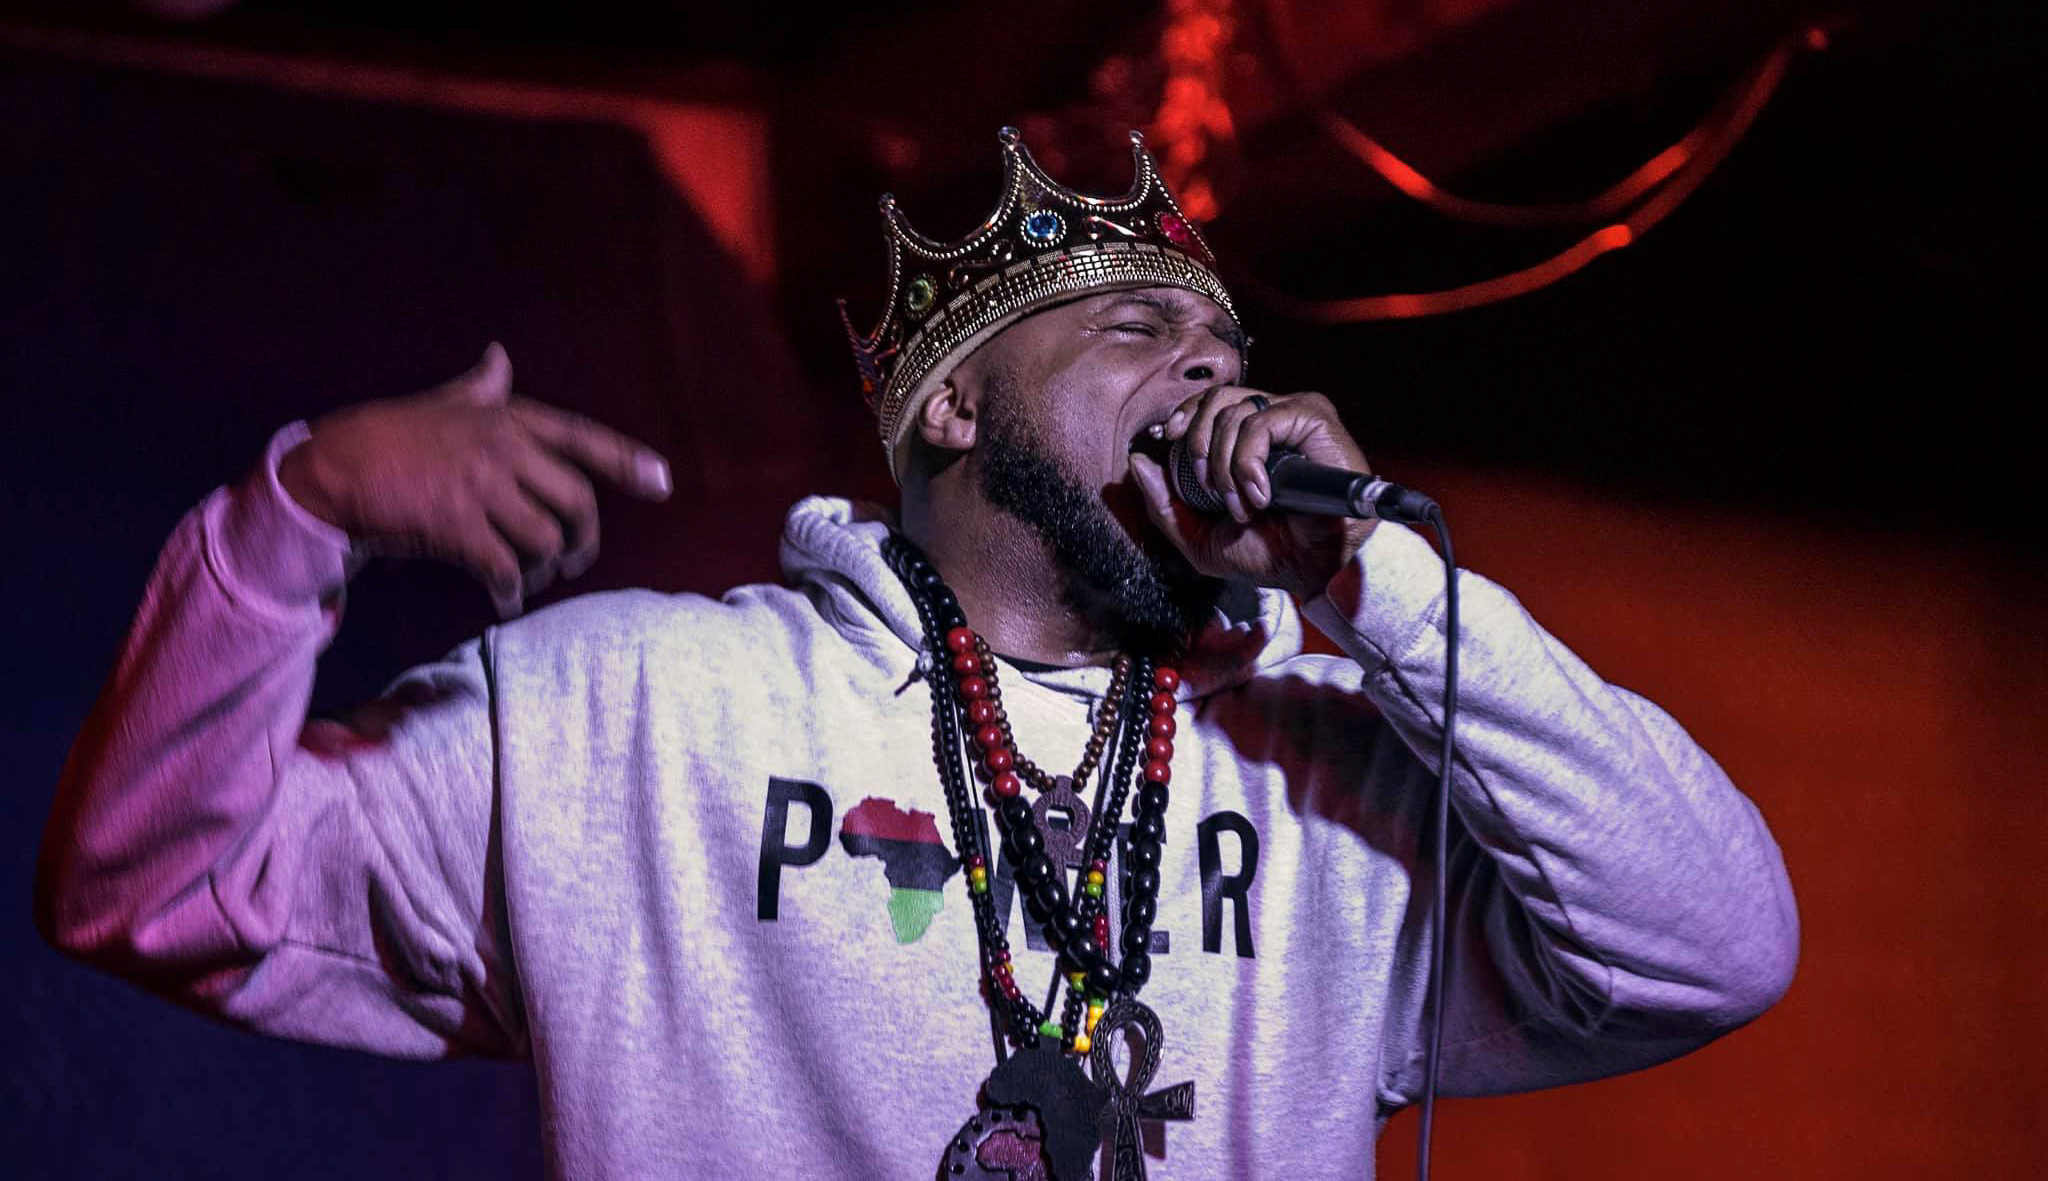 Man wearing a crown holding up a microphone